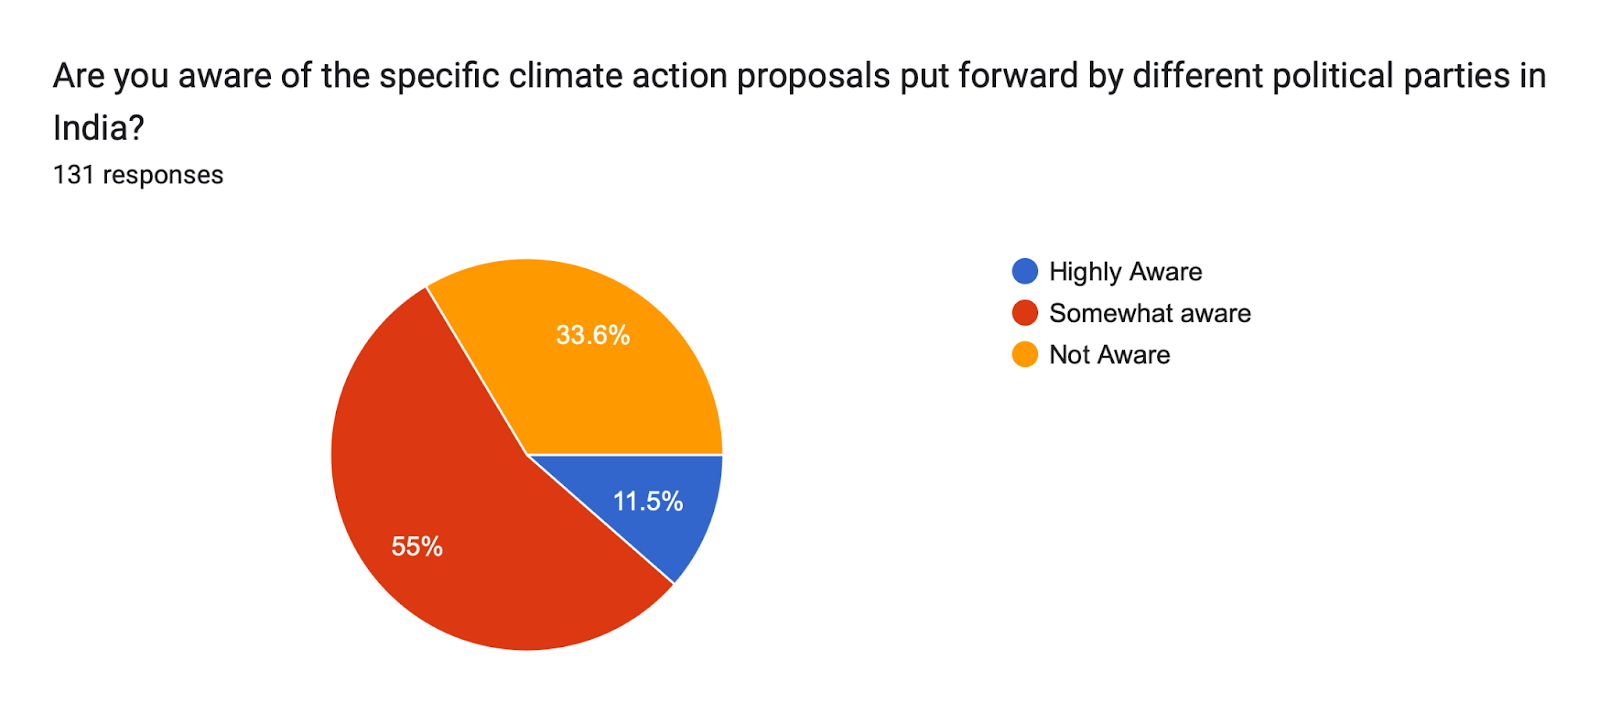 Forms response chart. Question title: Are you aware of the specific climate action proposals put forward by different political parties in India?

. Number of responses: 131 responses.